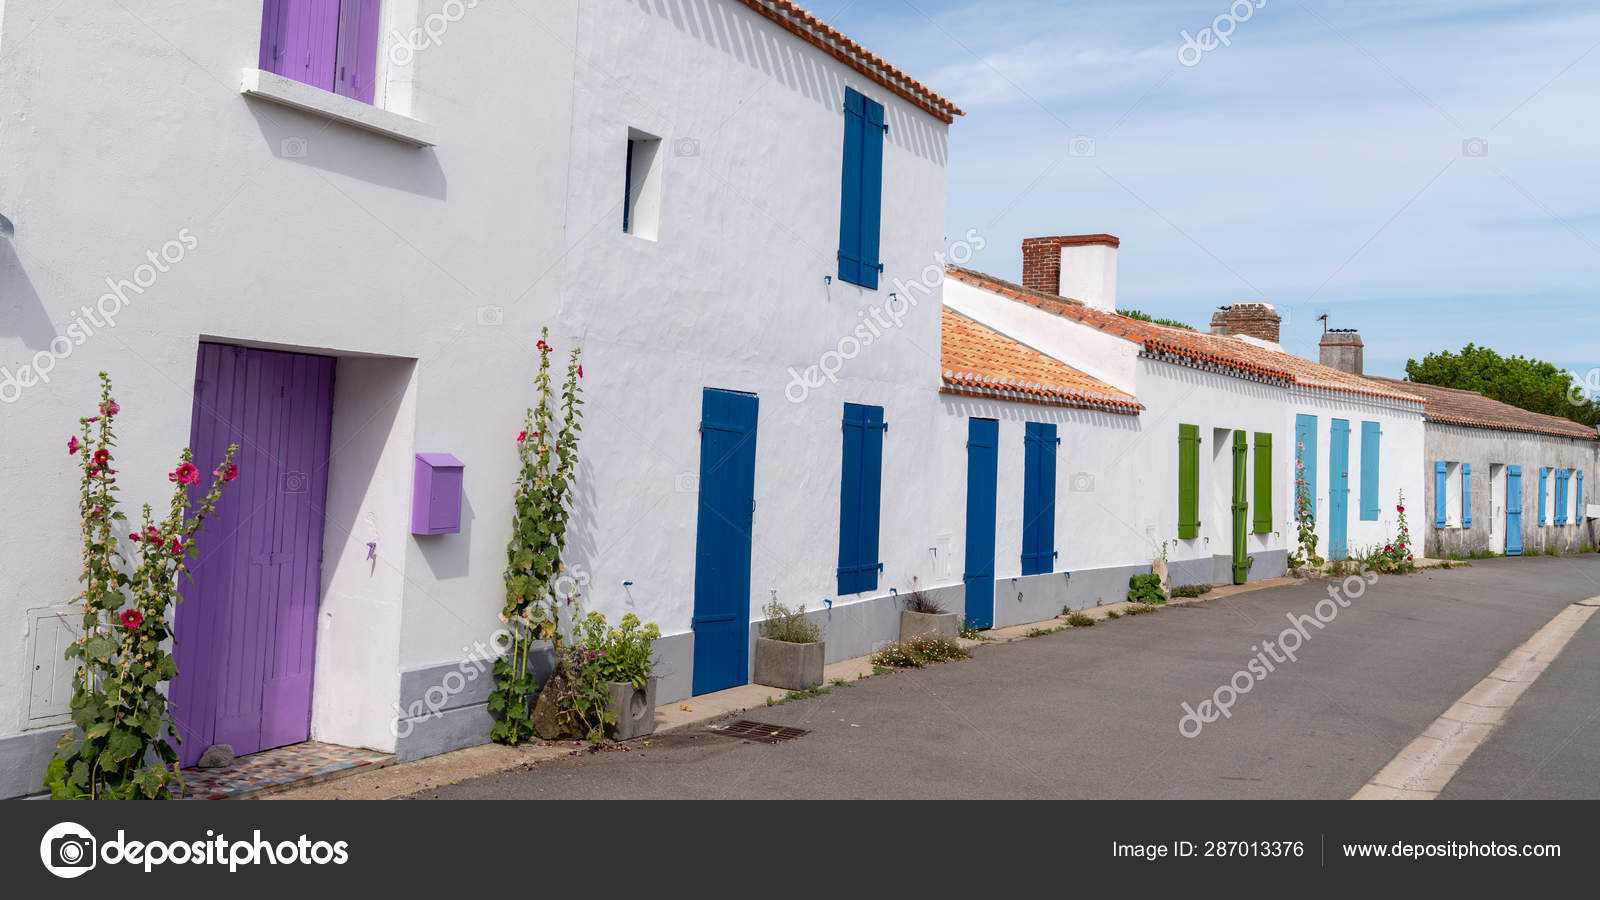 Picturesque Street White Houses France Web Banner Template Regarding Street Banner Template